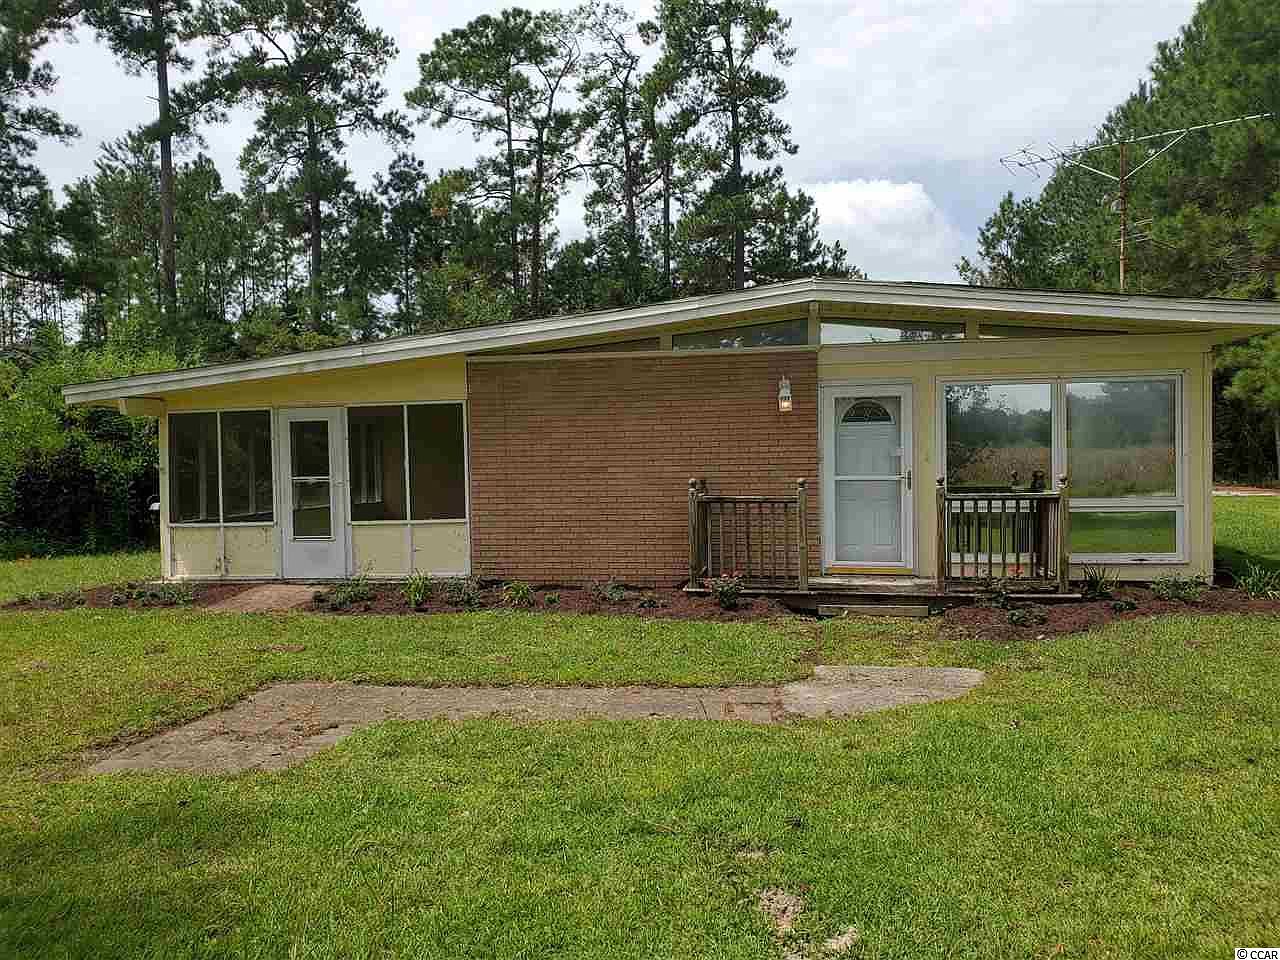 3839 Stern Drive Conway Sc Mls 1815589 Price 100 000 Beautiful 2 Bdrm 2 Bath Home In Northlake Pricedtosell Tal House Prices Myrtle Beach Area Conway